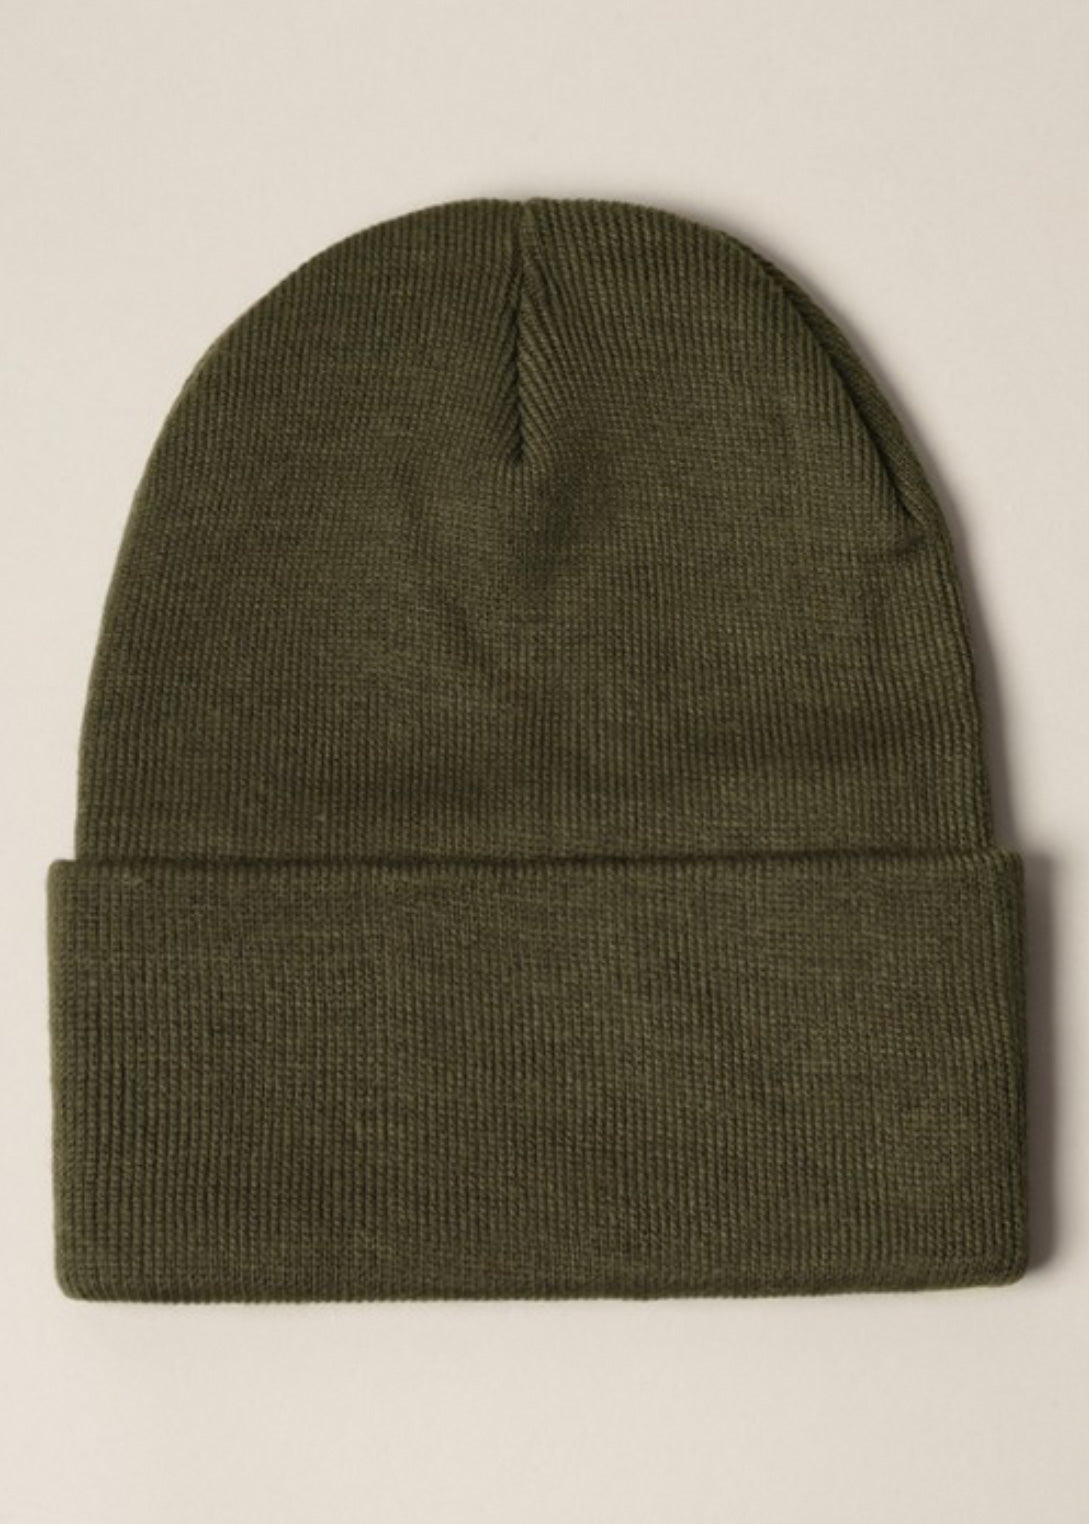 Olive beanie hat in a soft knit with wide cuff. 